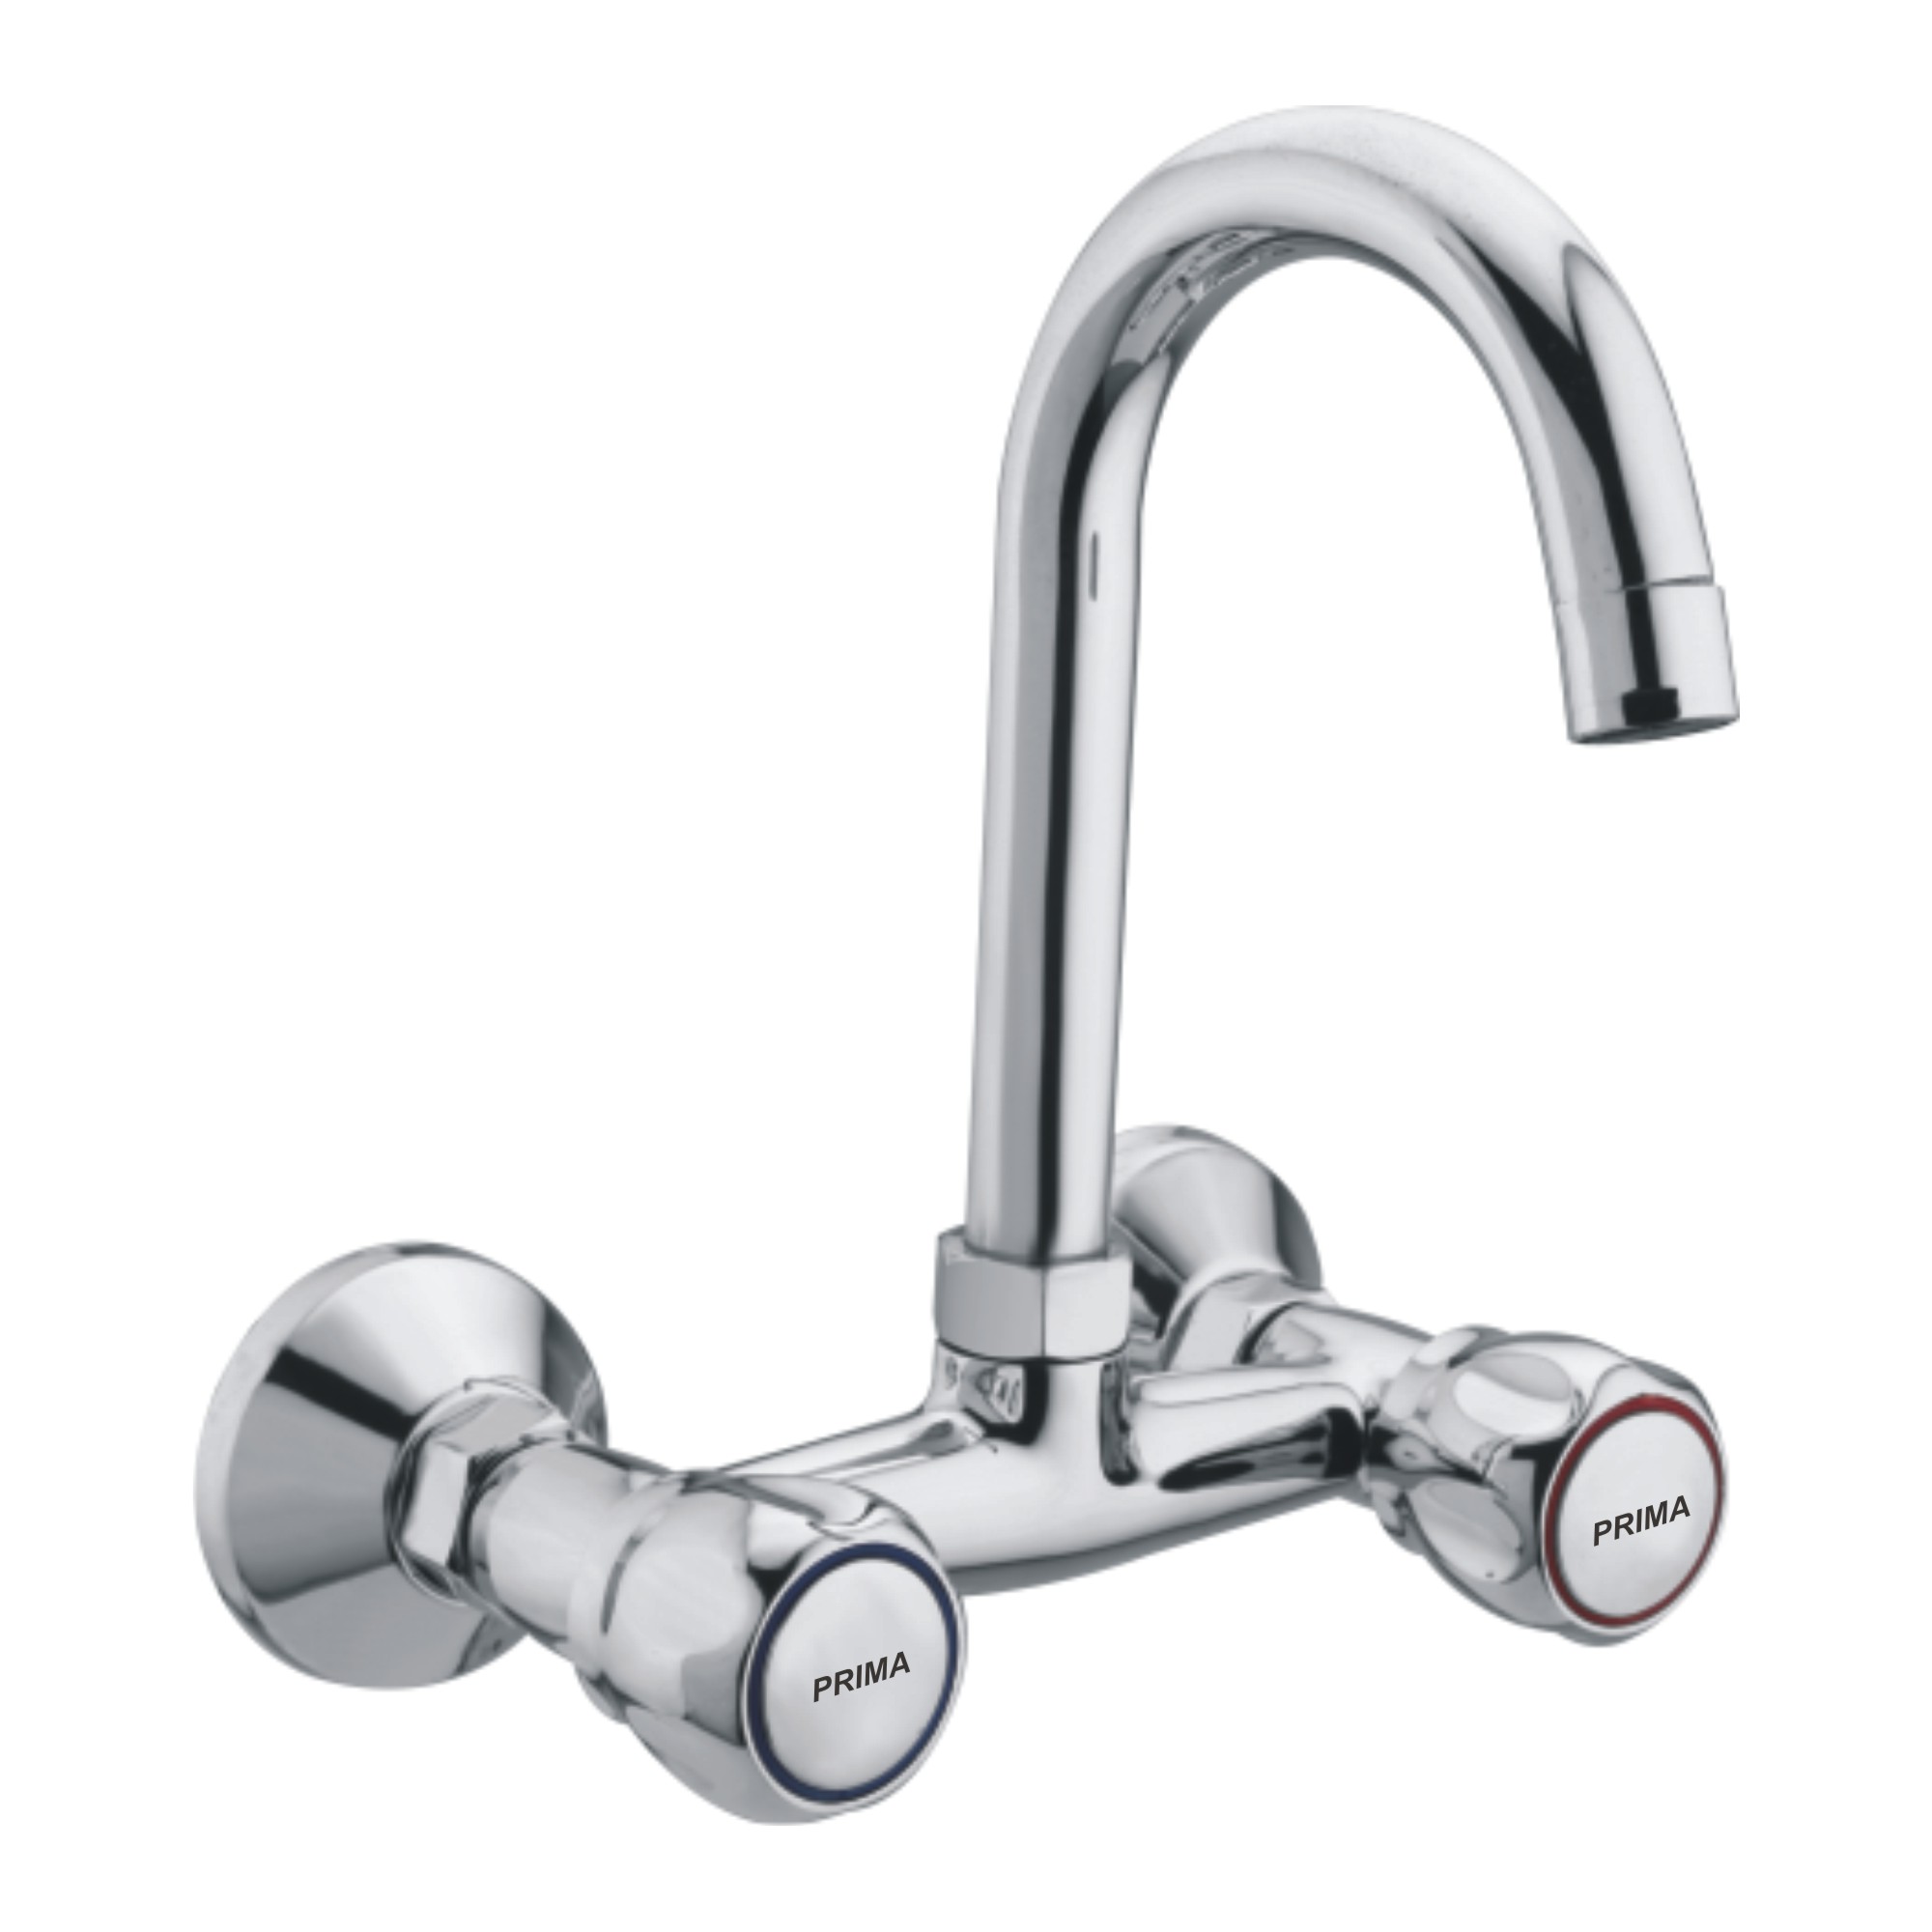 C.P Sink Mixer with Swivel Spout